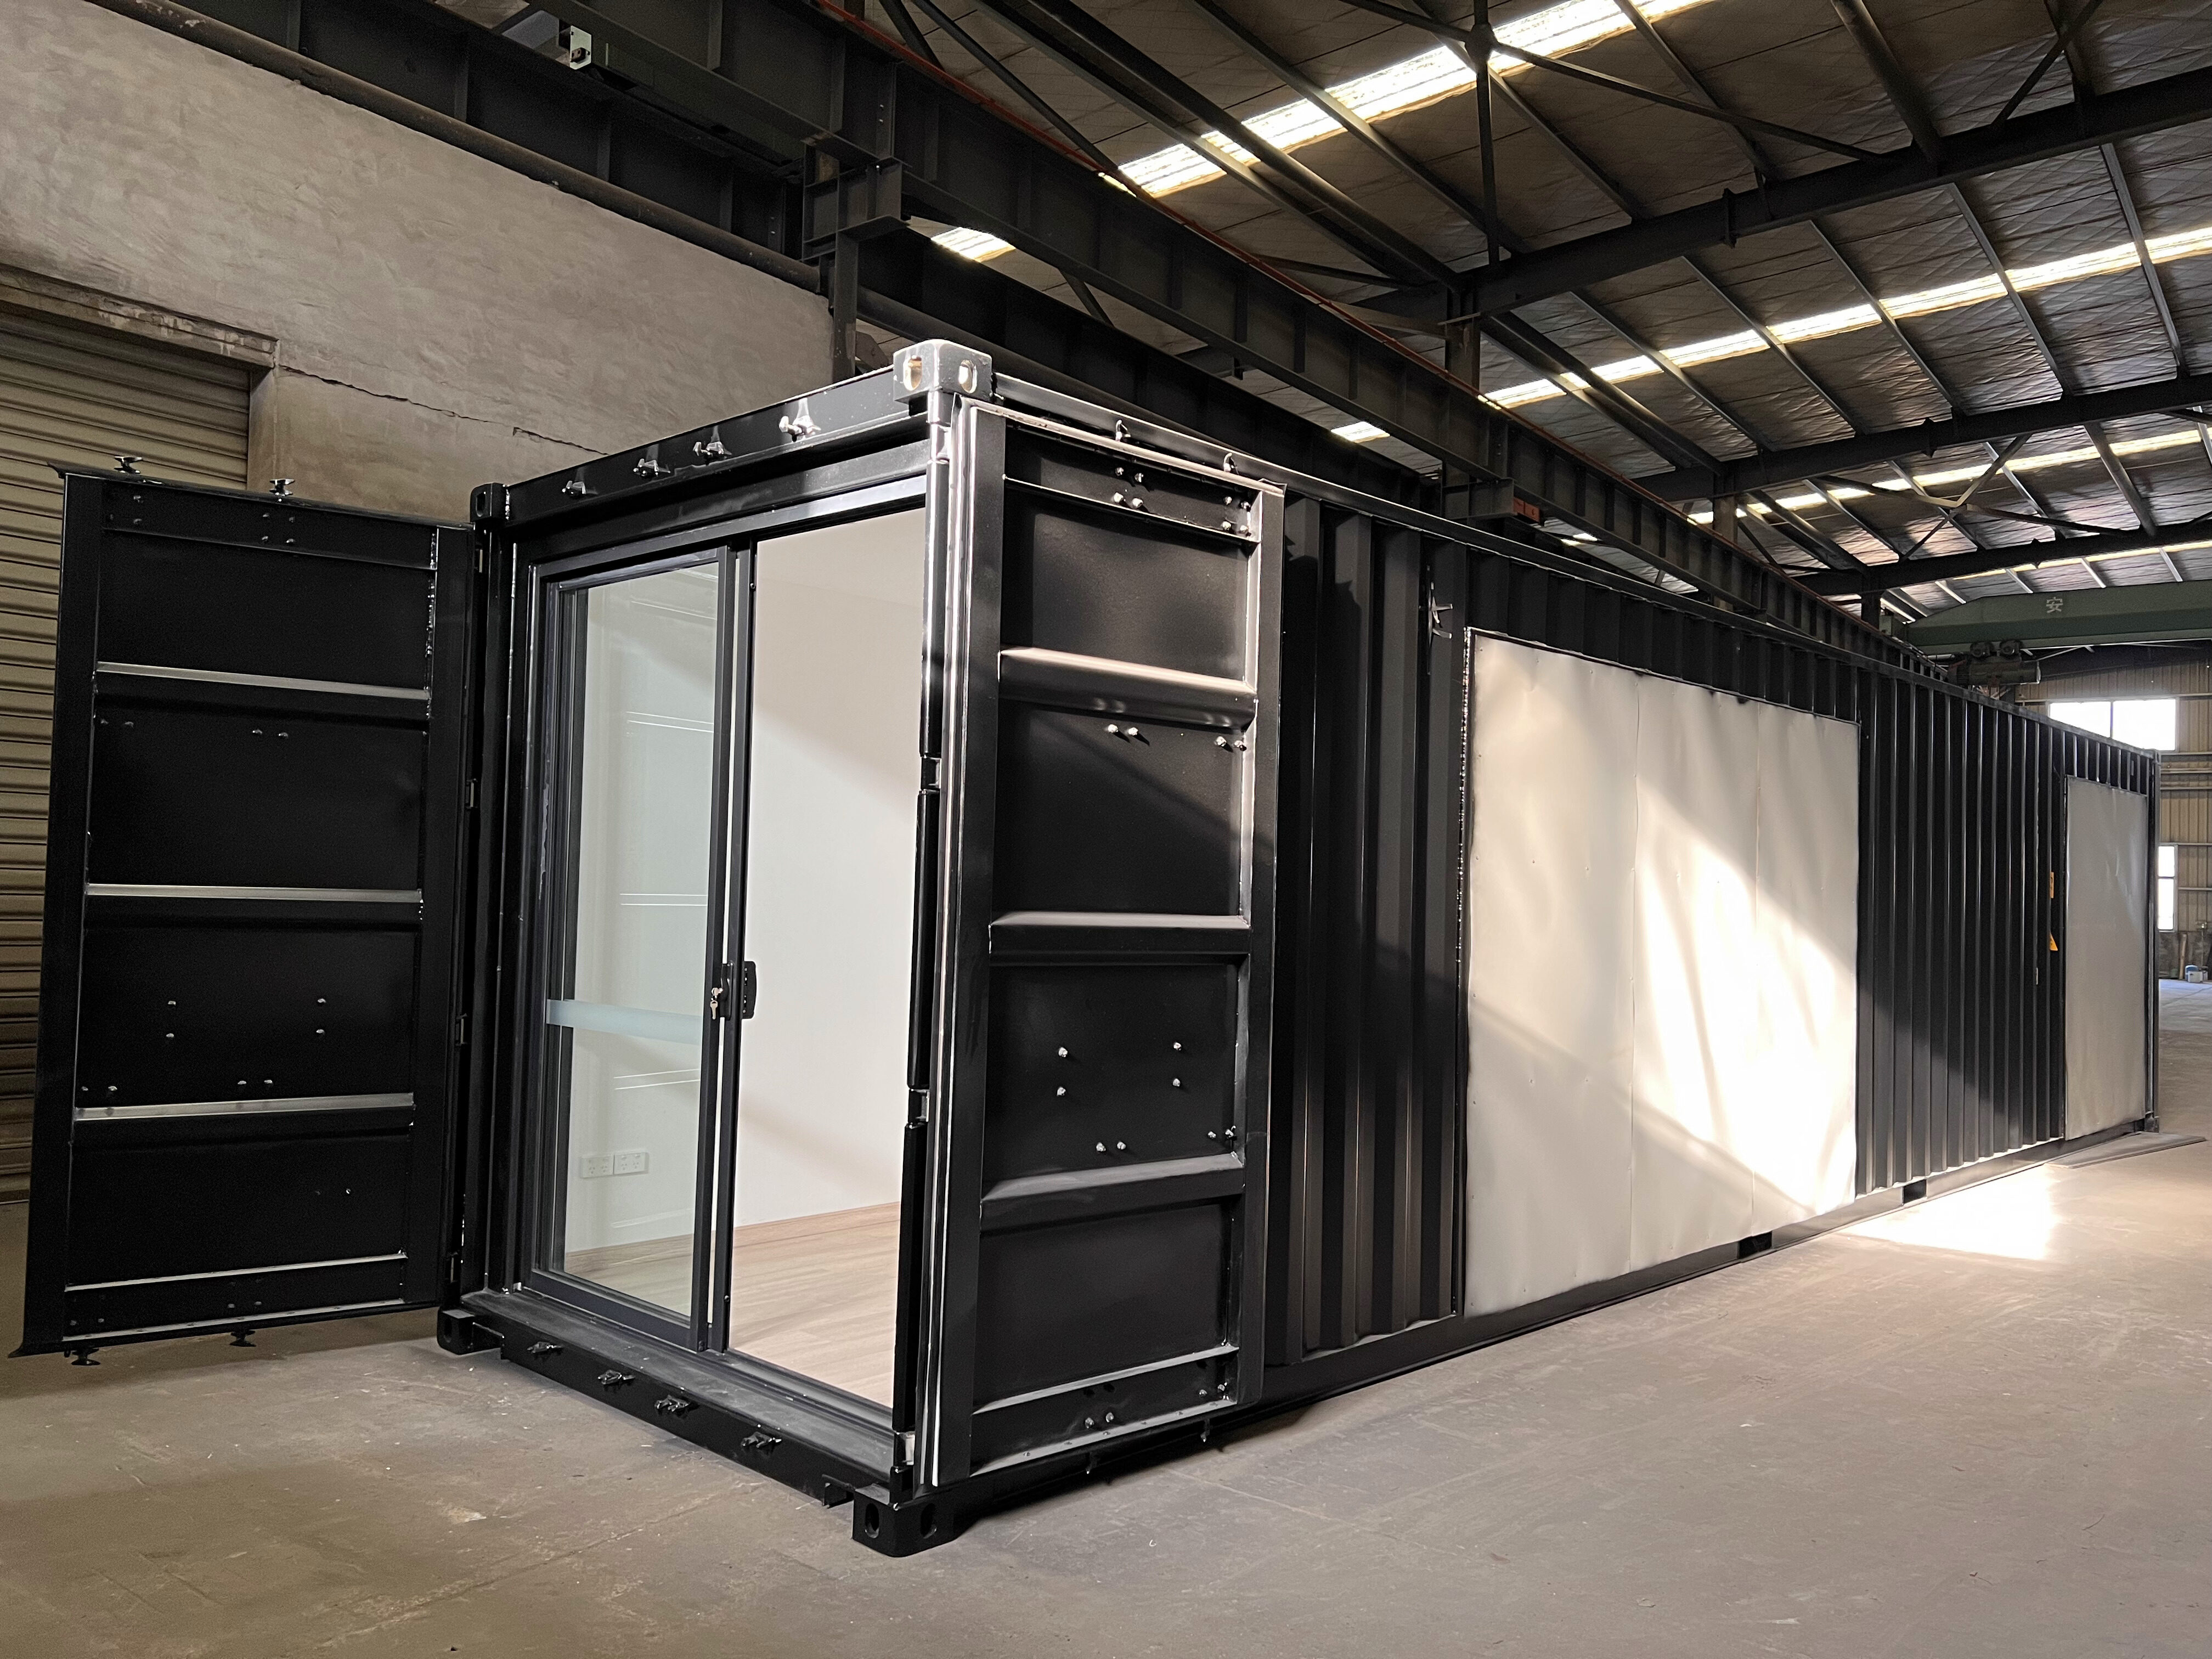 living turnkey container house oem, living turnkey container house odm, living turnkey container house customize, living turnkey container house service, living turnkey container house vendor